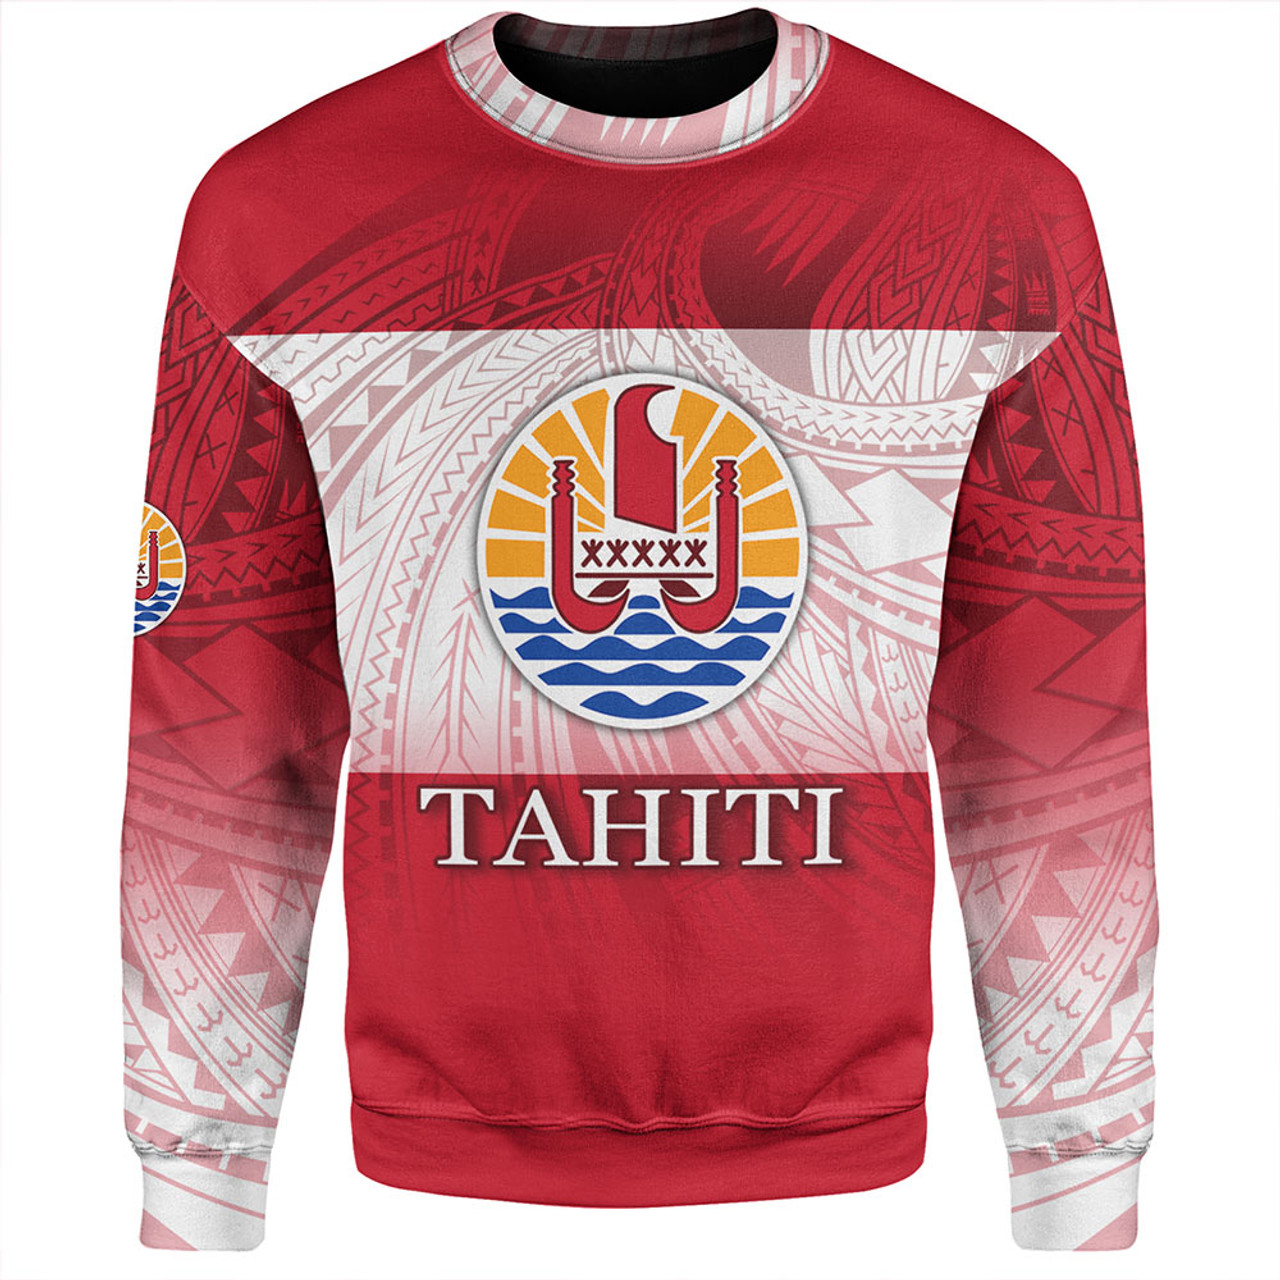 Tahiti Sweatshirt - Flag Color With Traditional Patterns